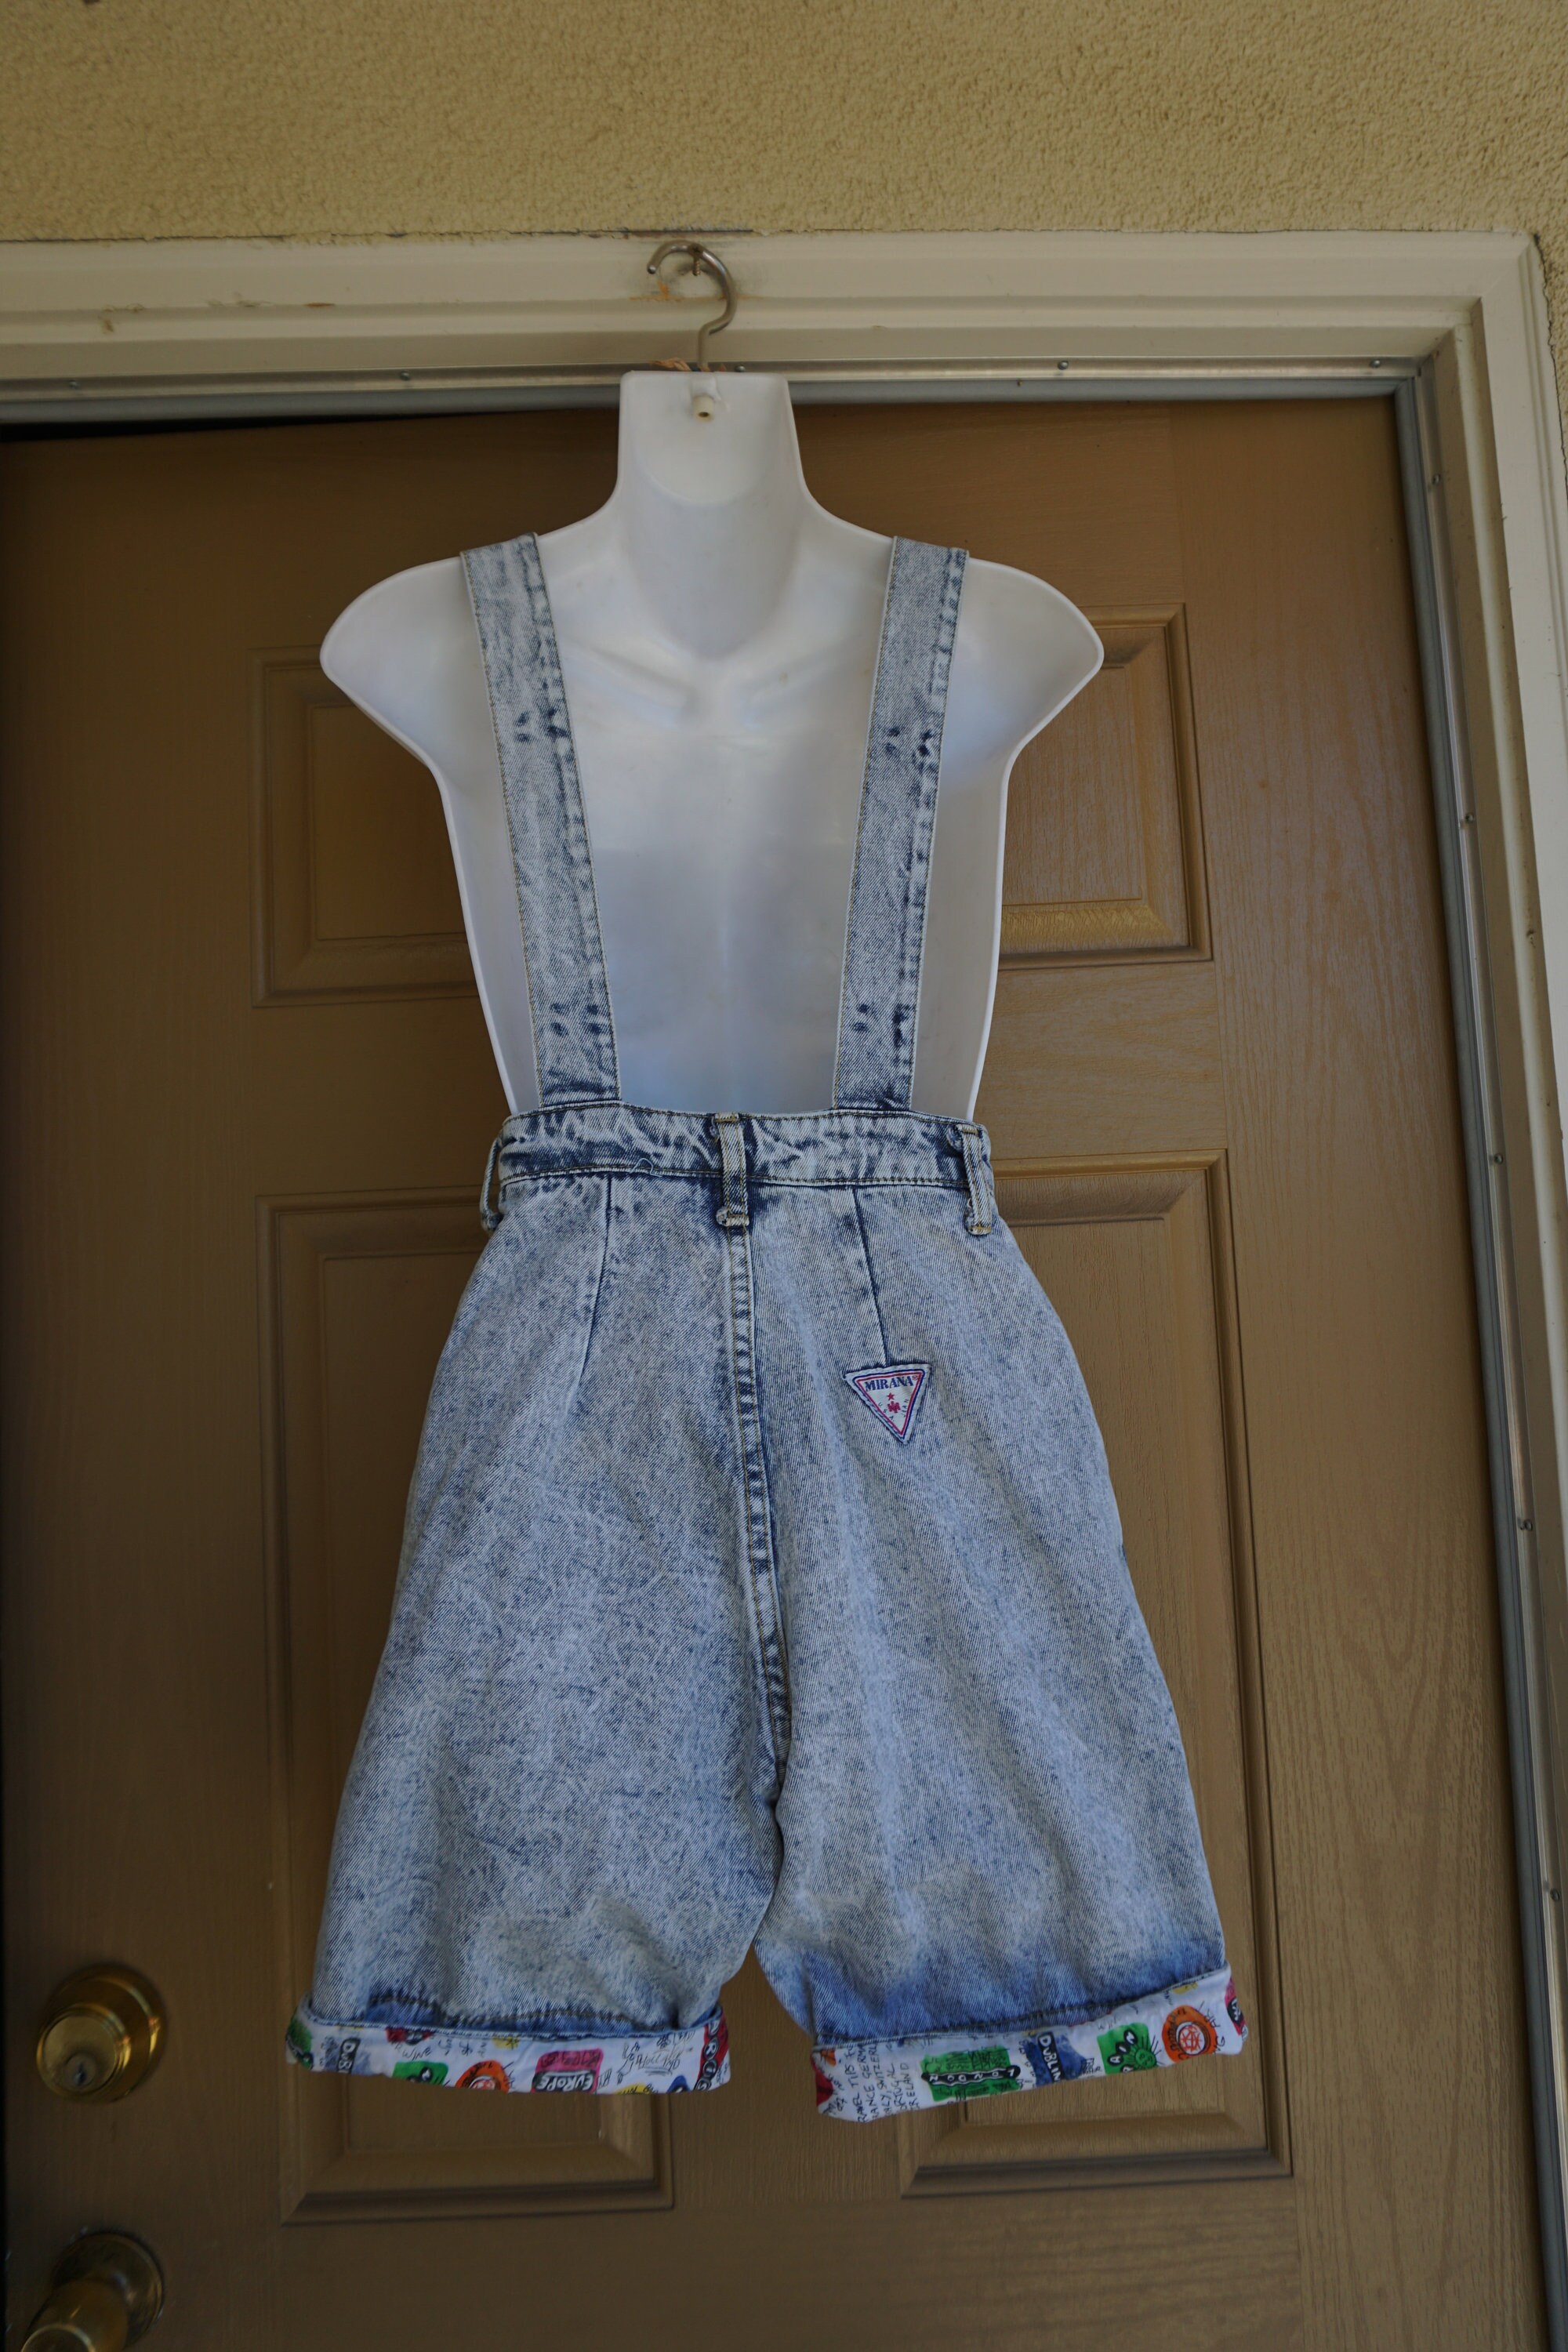 Vintage 1980s 1990s high contast denim shorts overalls made by | Etsy